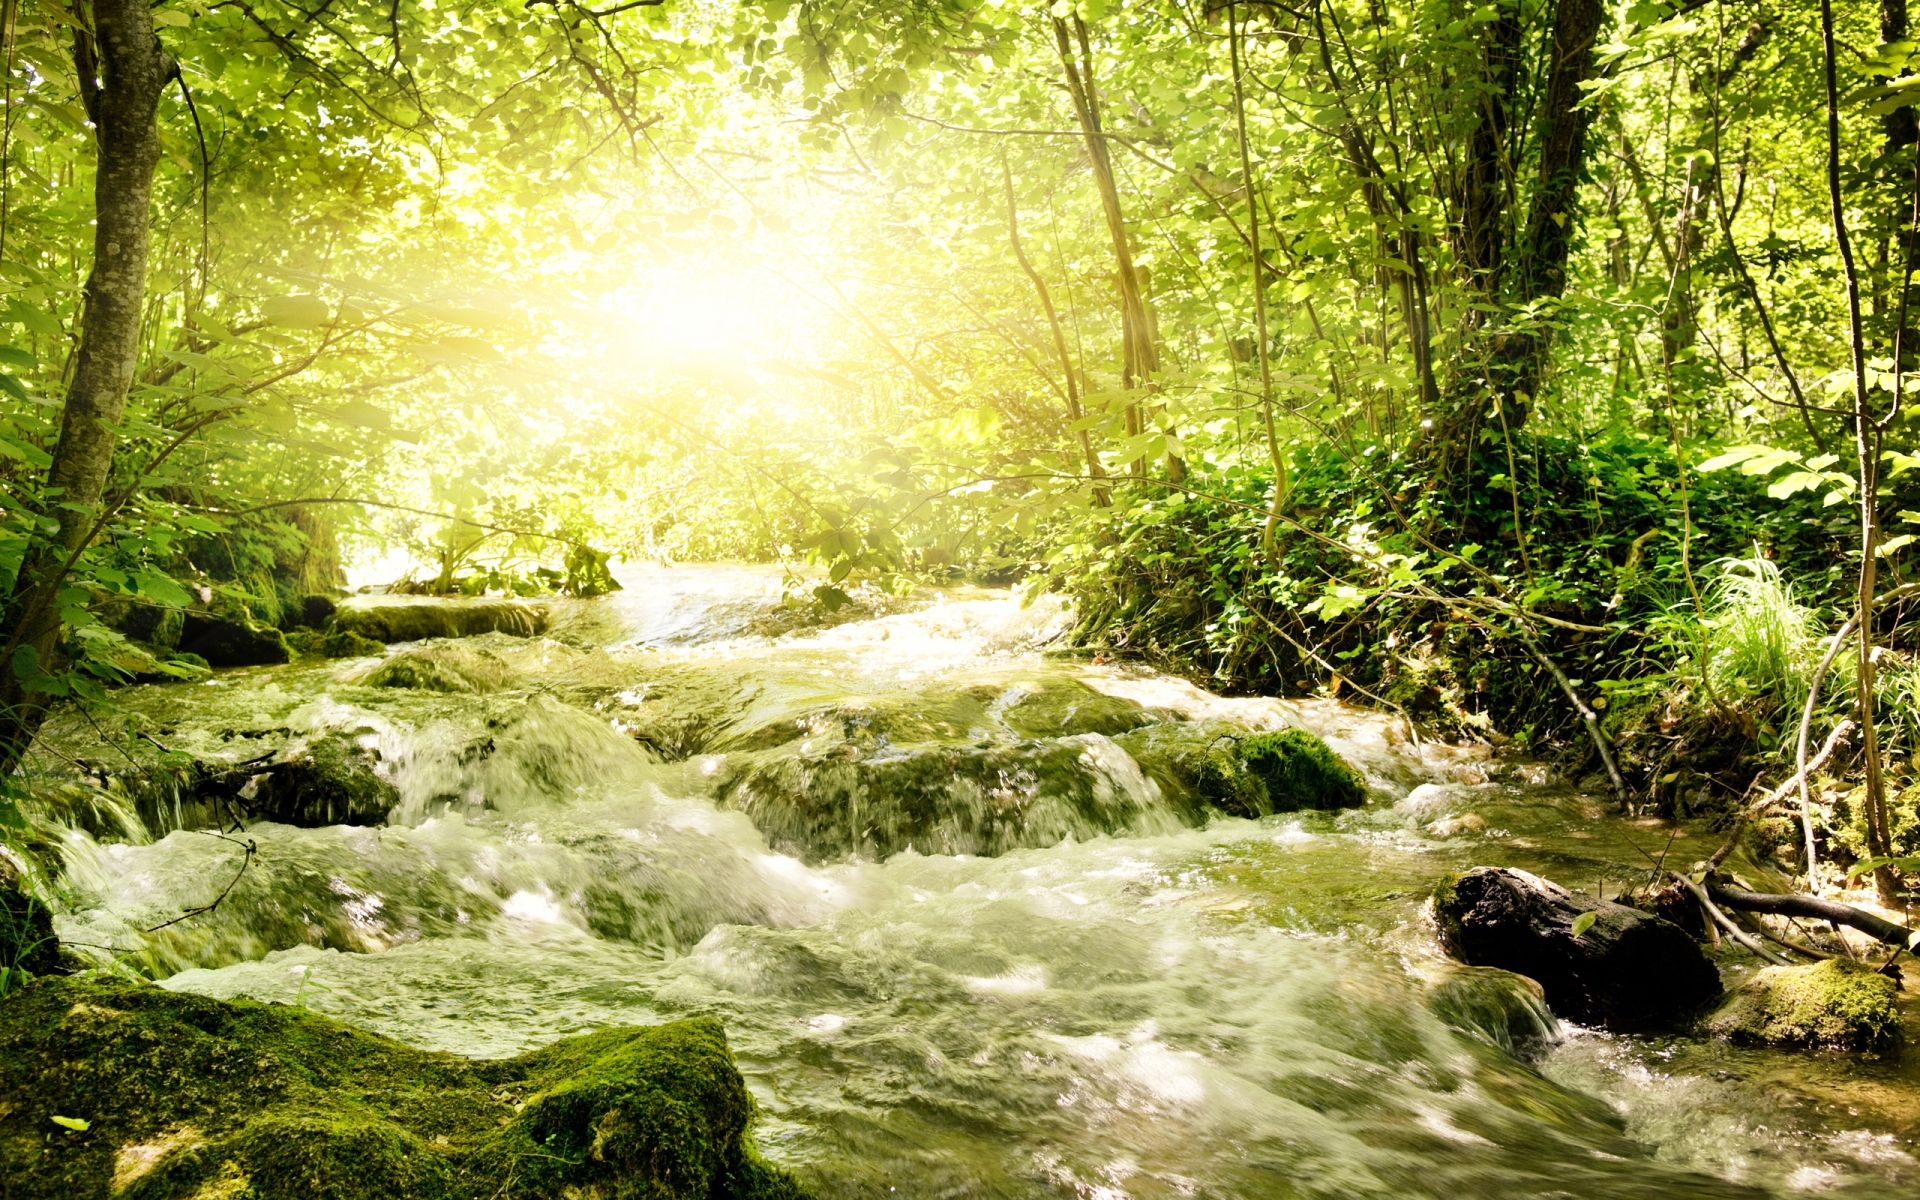 nature, Landscapes, Trees, Forests, Rivers, Streams, Water, Rapids, Drops, Waves, Rocks, Bank, Shore, Spring, Summer, Sunlight, Sun, Beam, Bright, Green Wallpaper